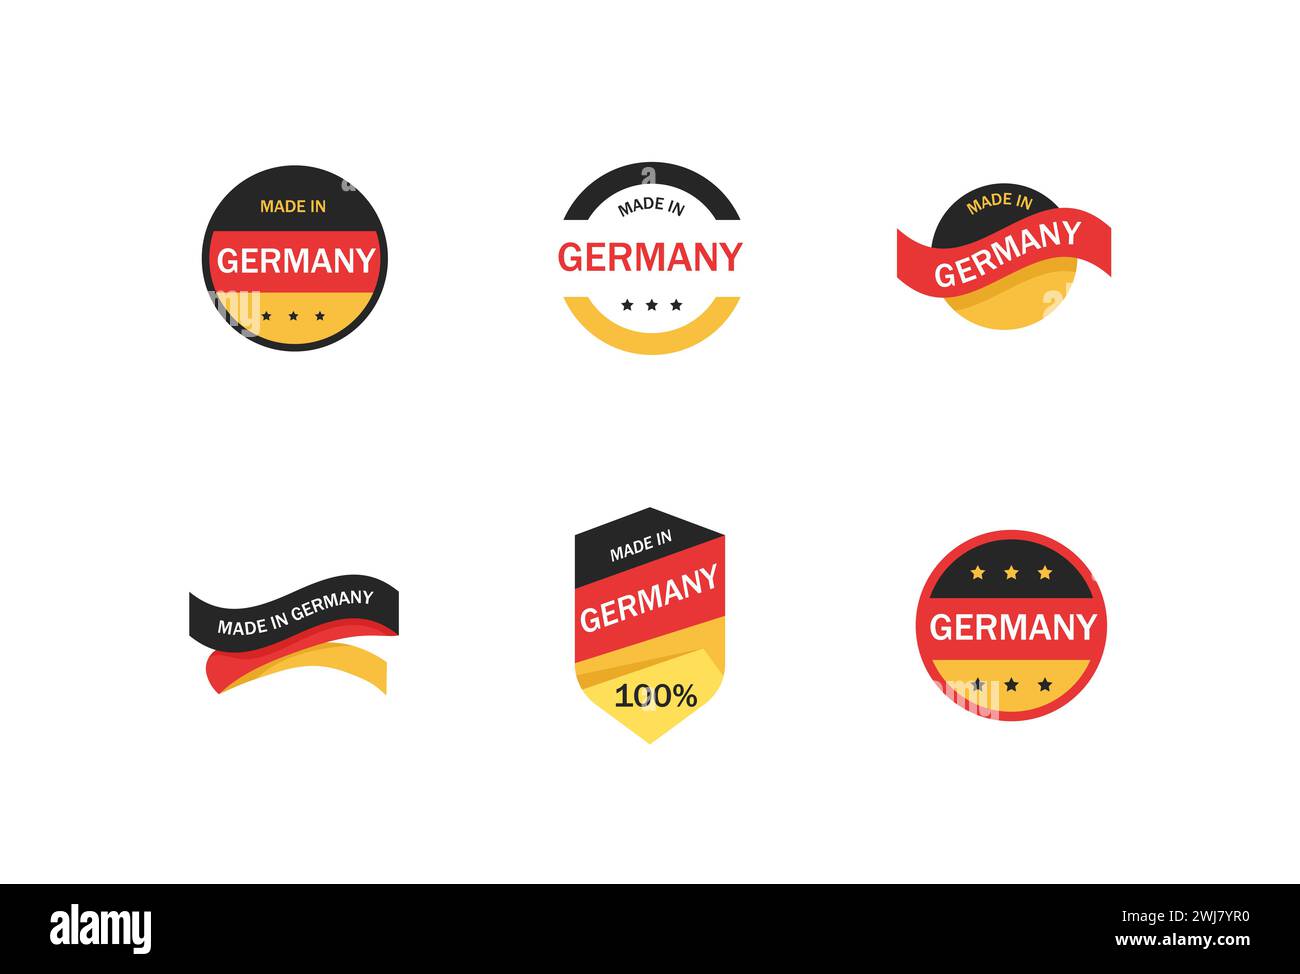 Made in germany labels set. Business production sticker with german flag Stock Vector